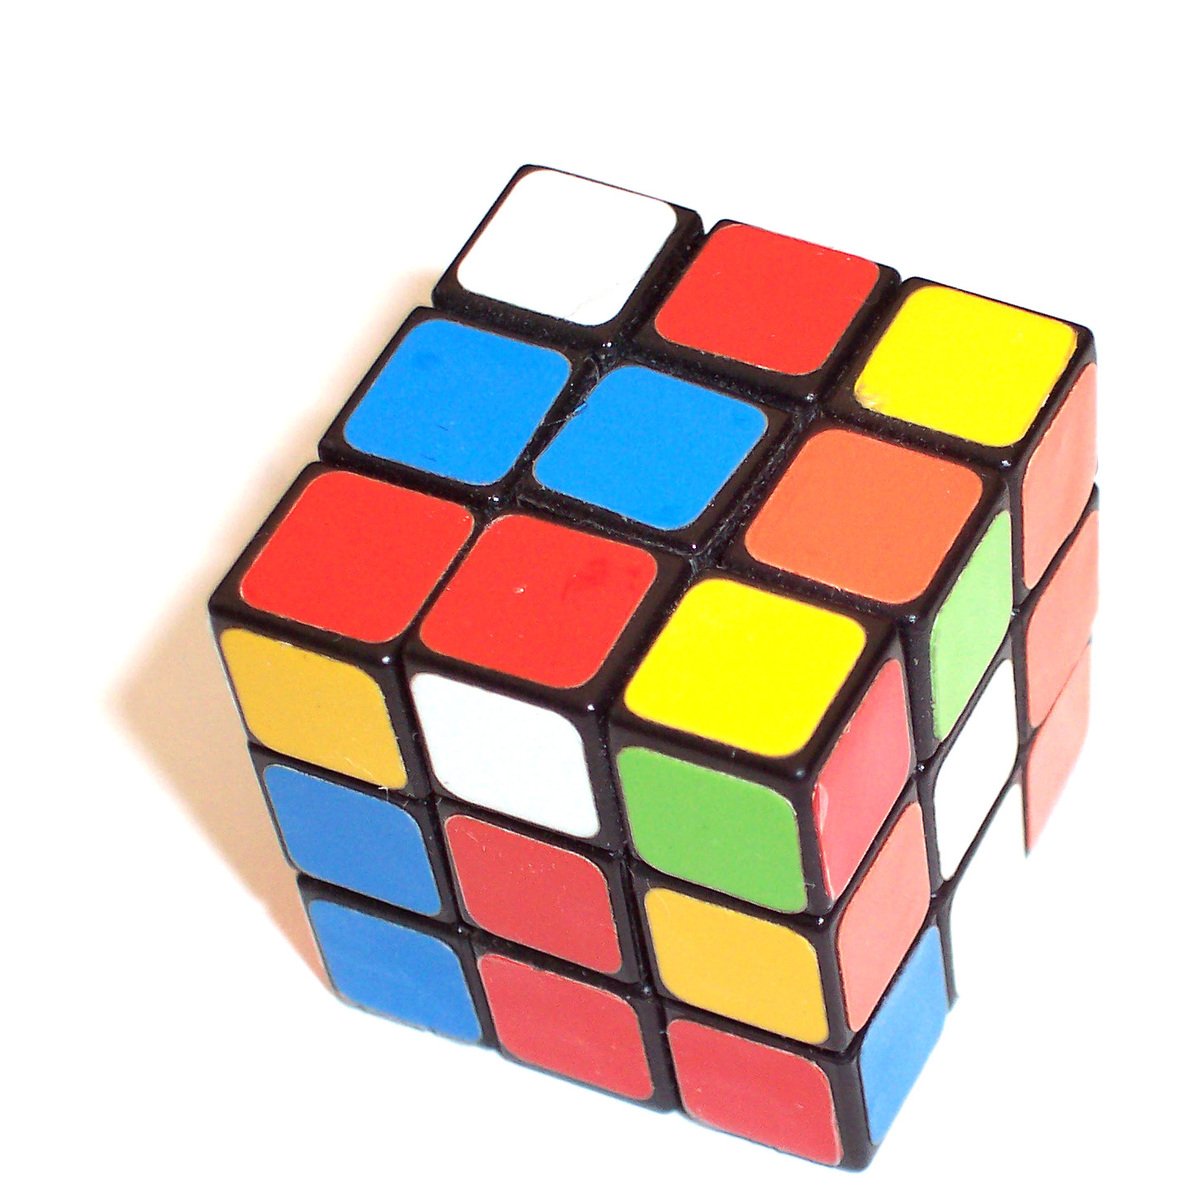 an object that is colorful and has multiple squares on it